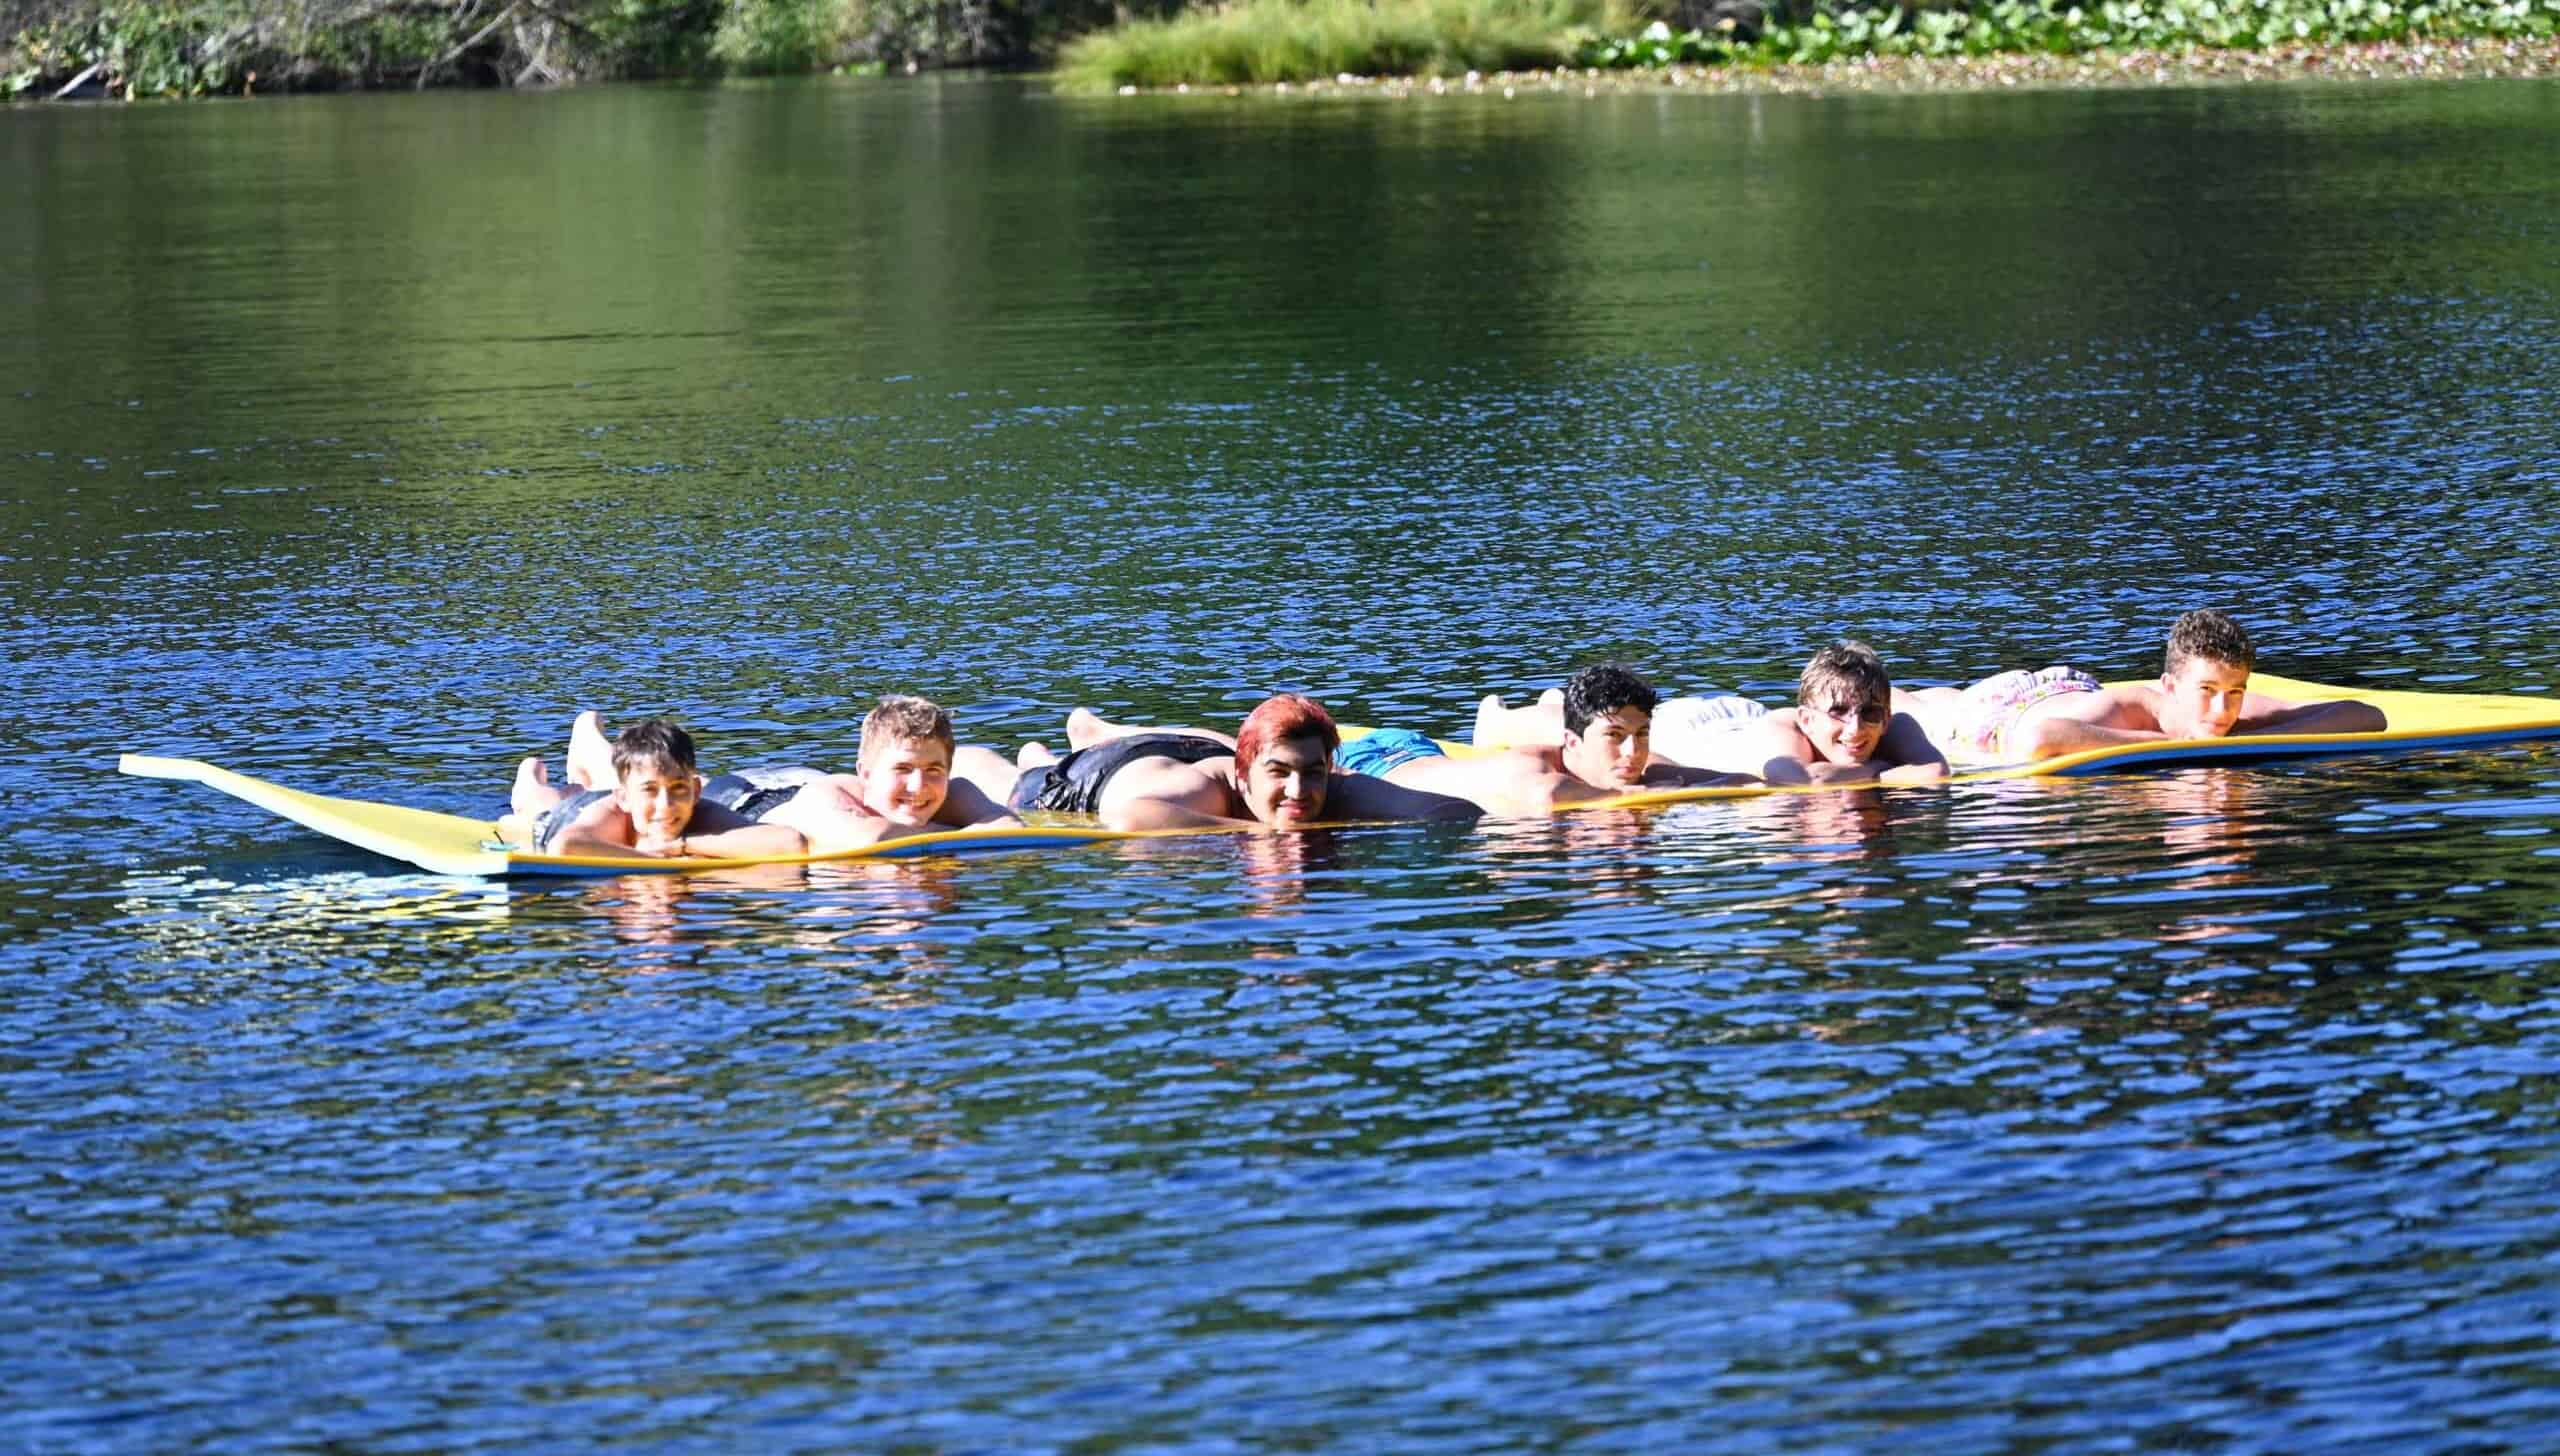 A group of campers in the water.